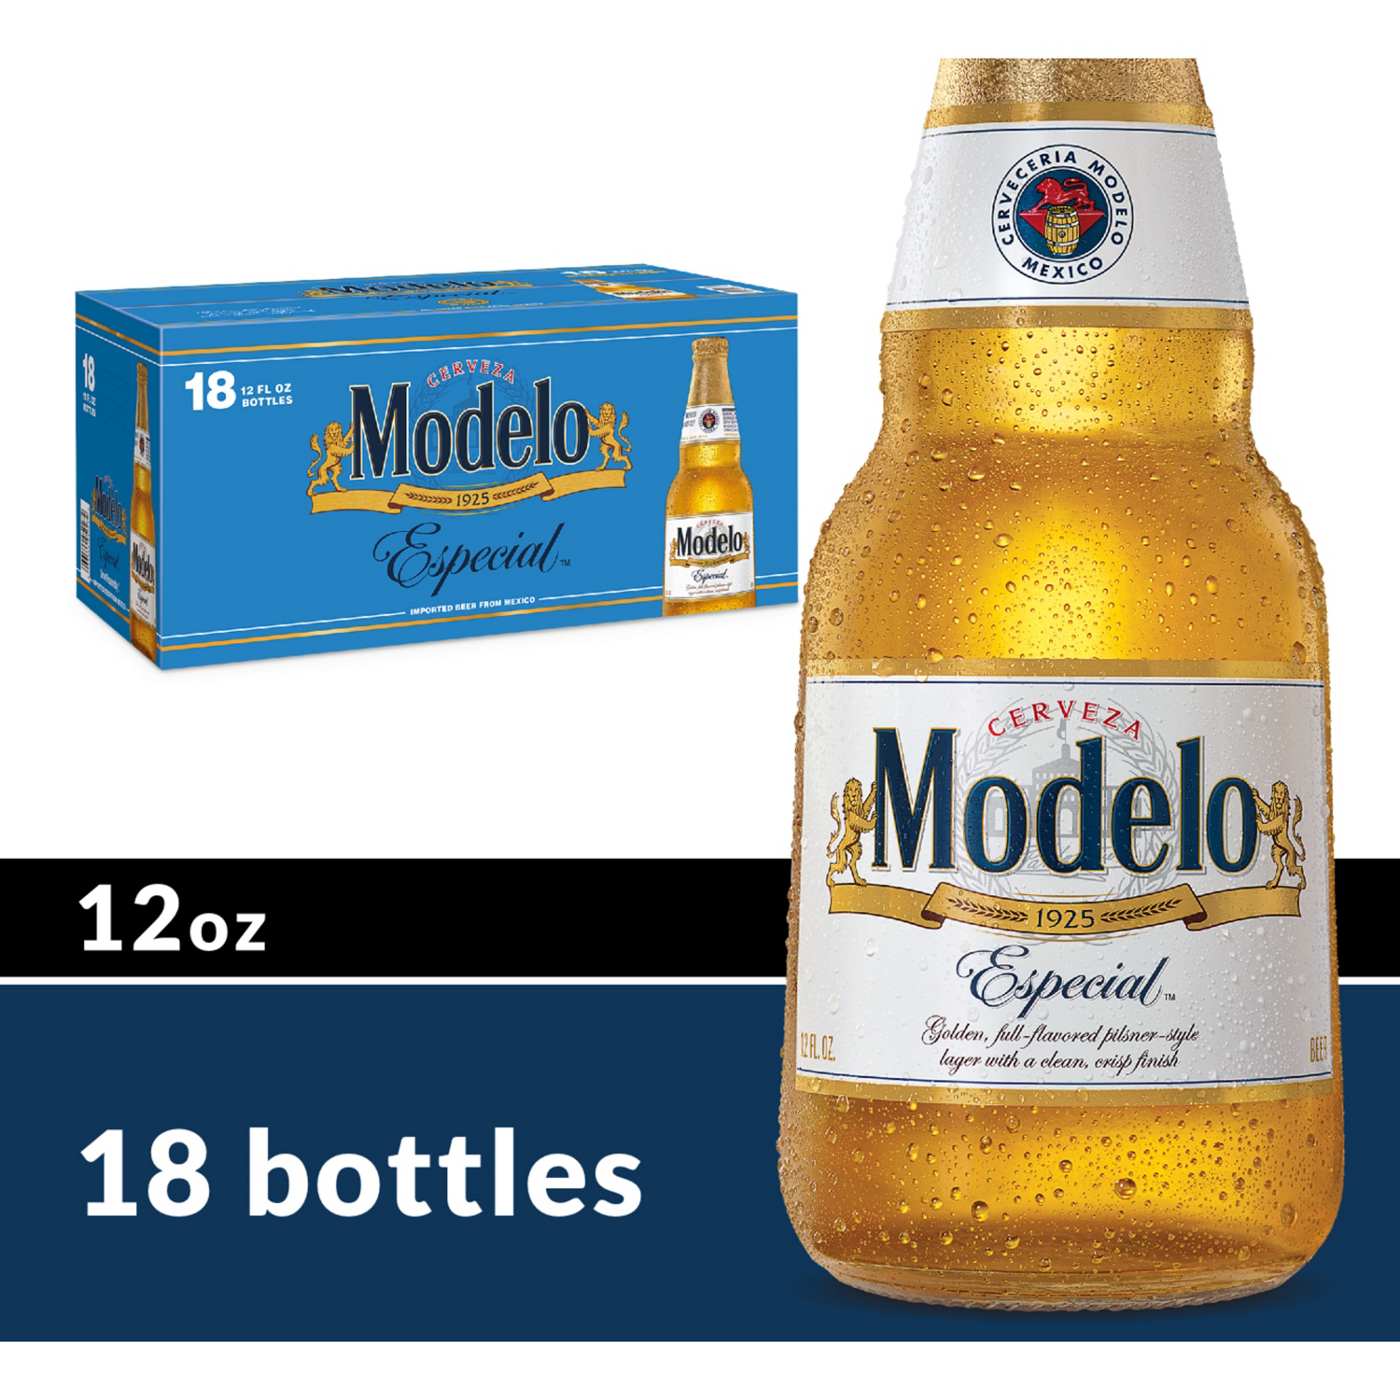 Modelo Especial Mexican Lager Import Beer 12 oz Bottles, 18 pk; image 5 of 11